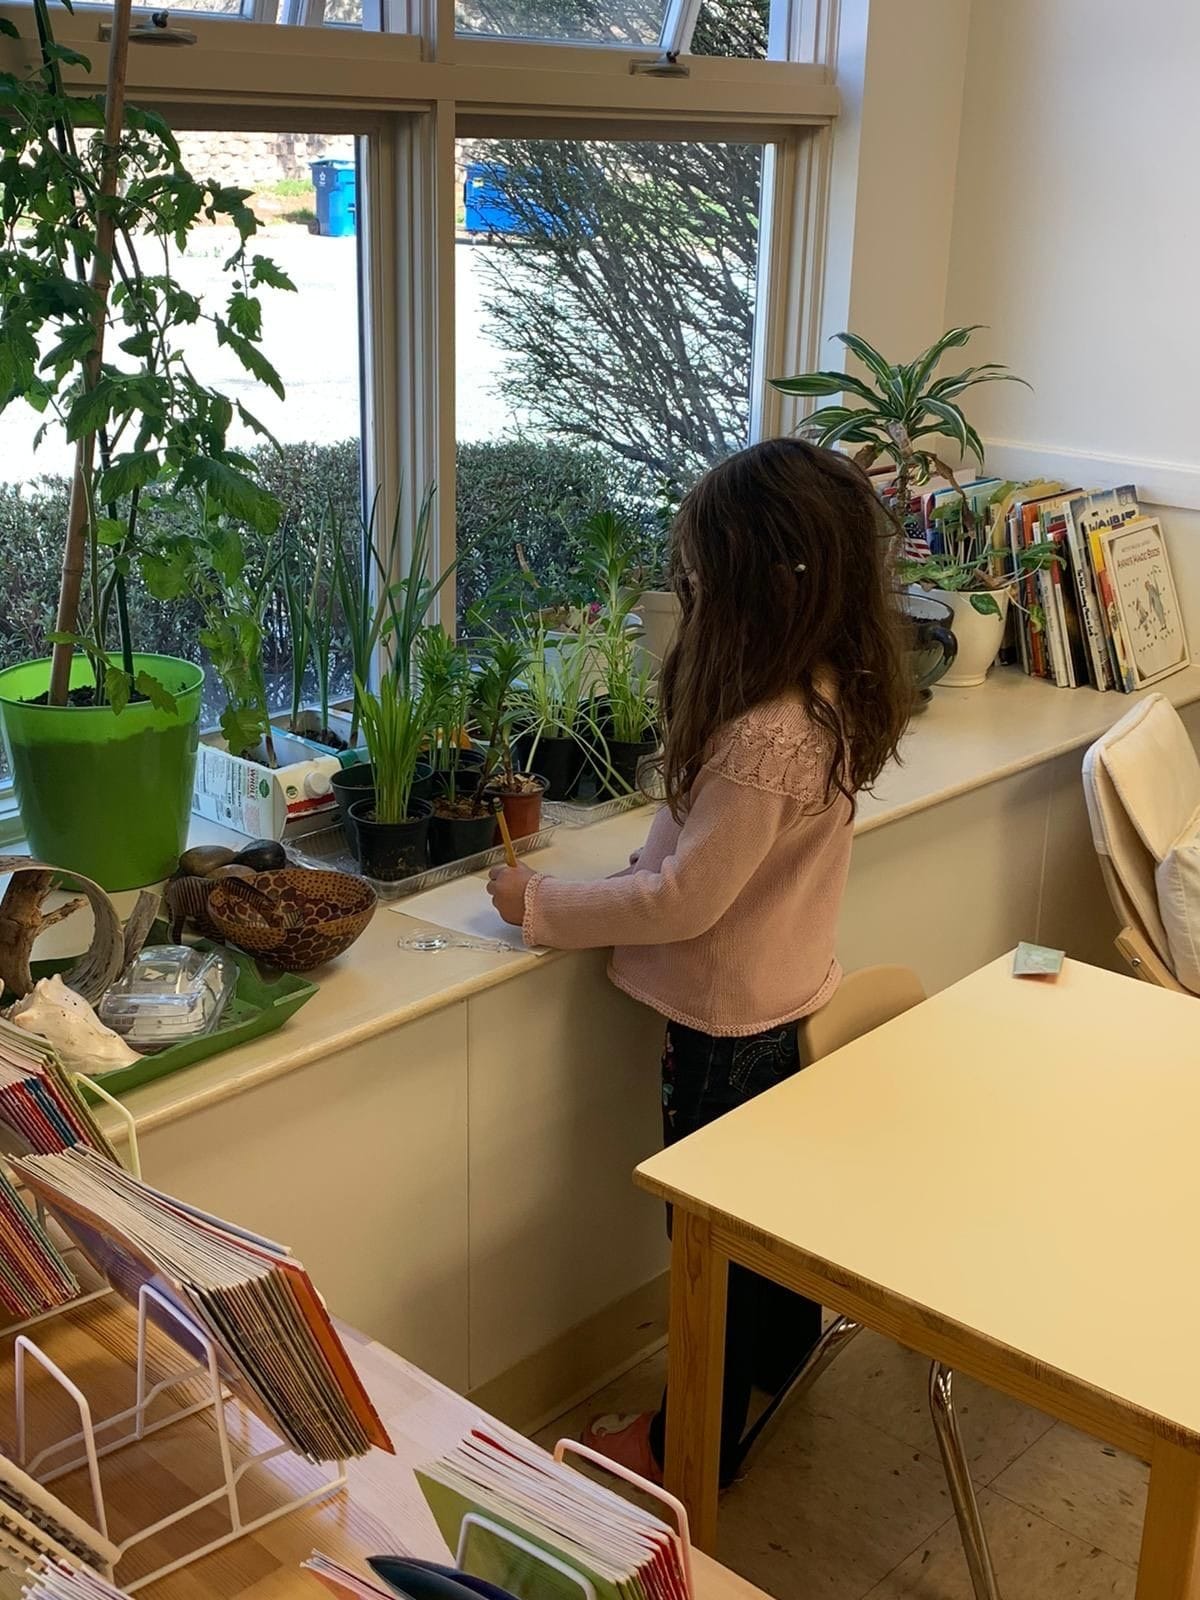 A child examining the indoor plants using a magnifying glass and writing a journal about it.